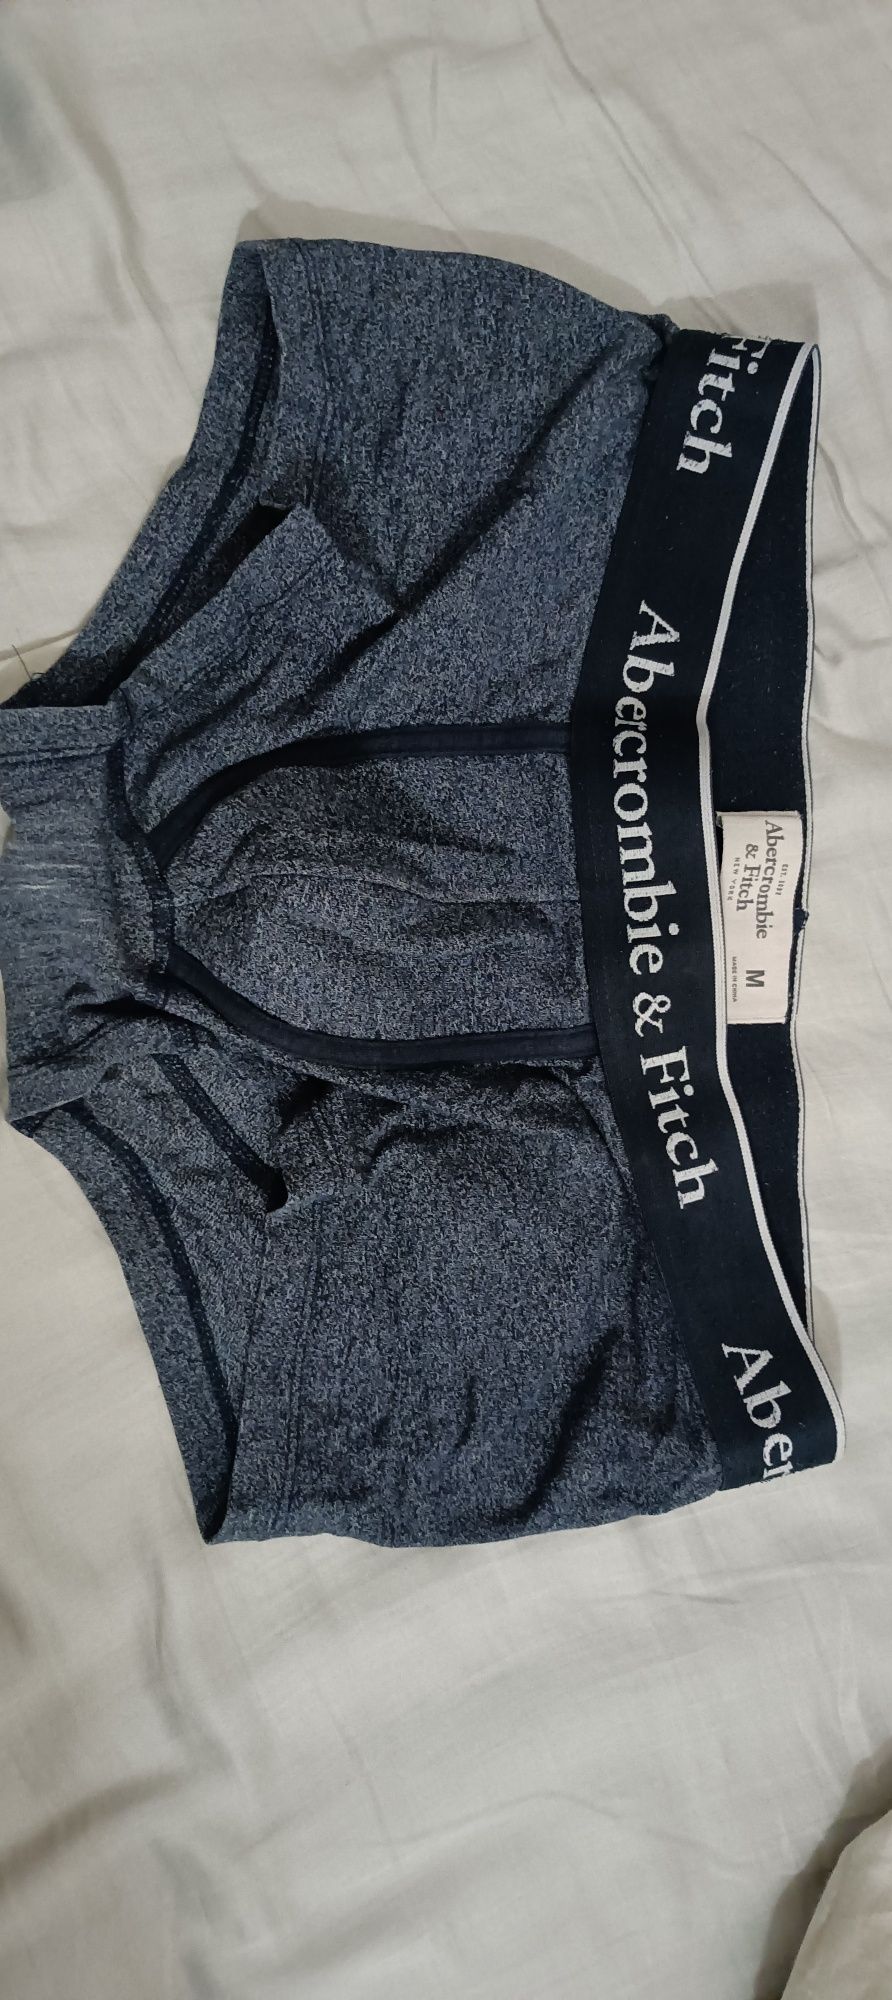 Boxer Abercrombie & Fitch